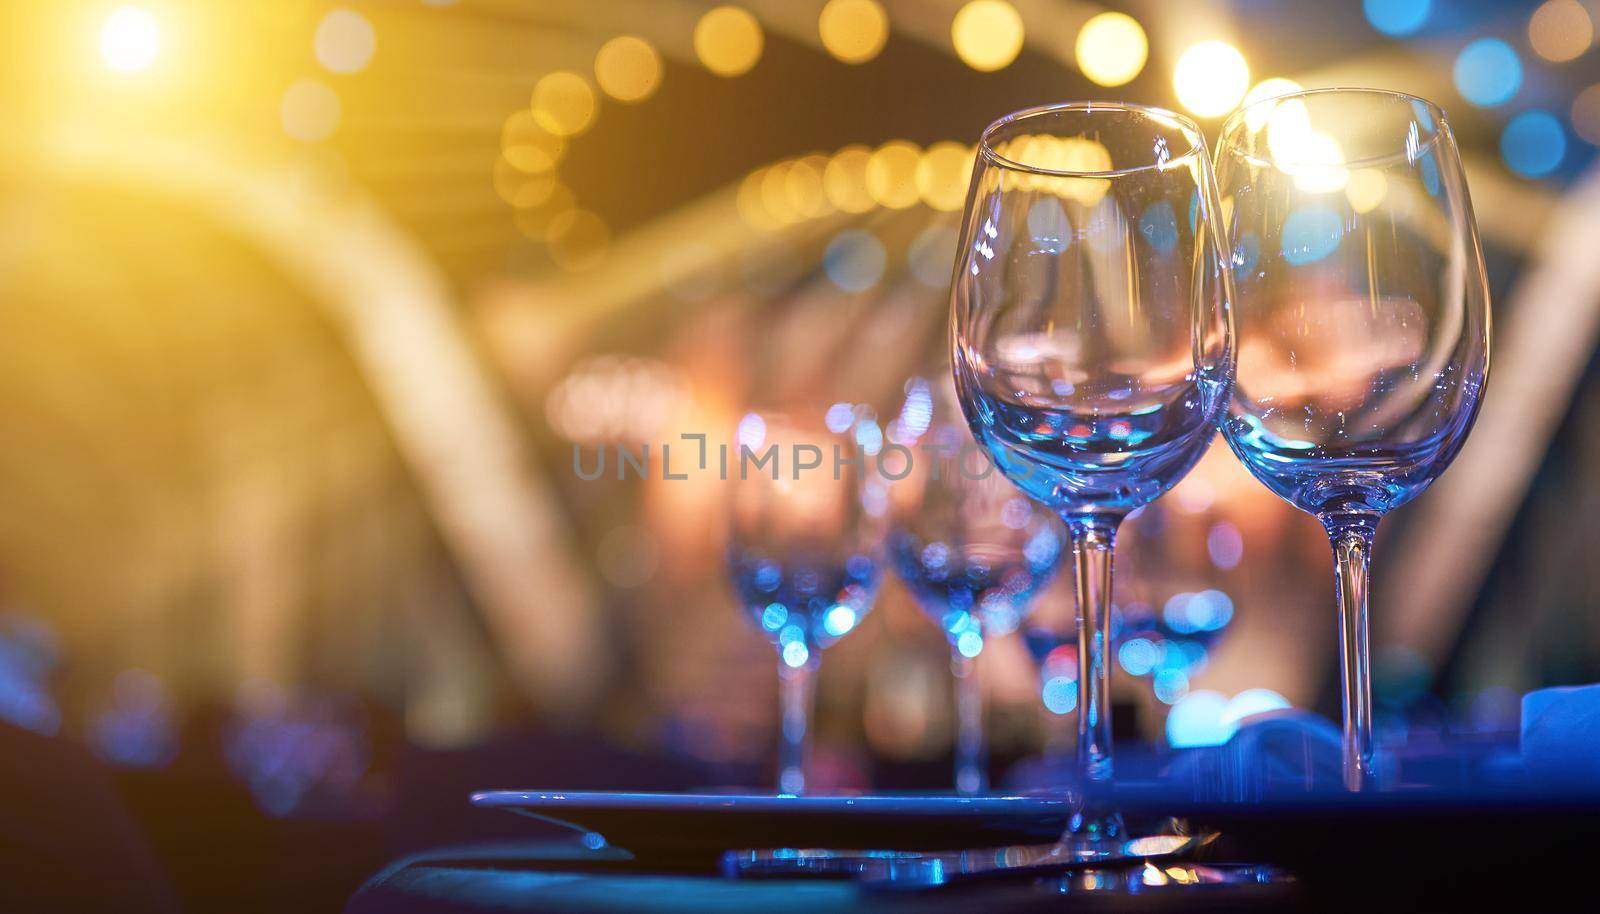 A glass of wine on table with colorful backlight by AntonIlchanka